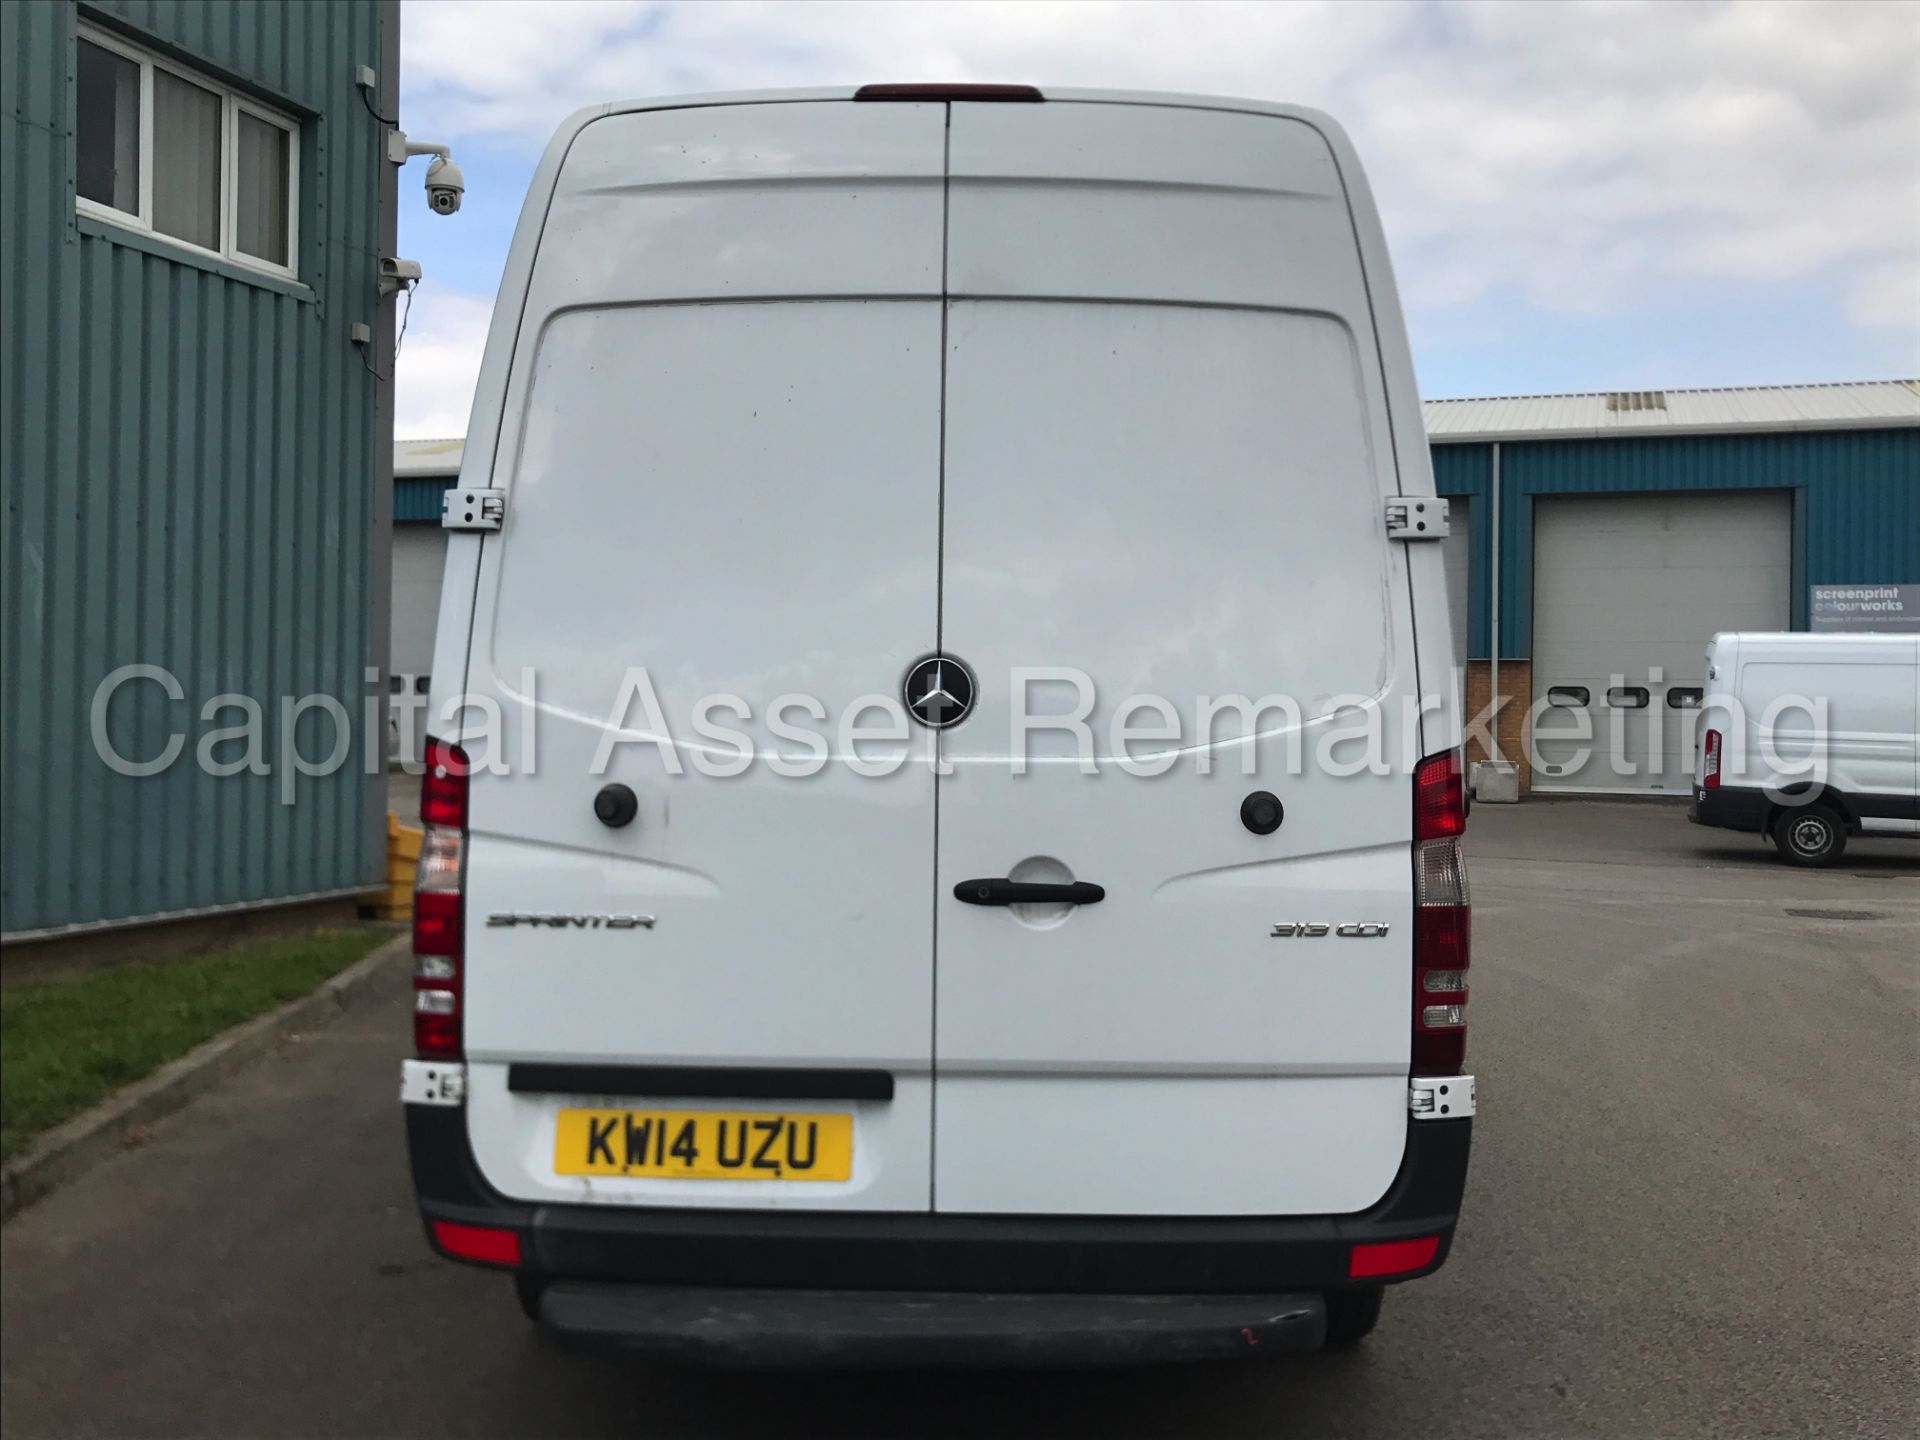 MERCEDES-BENZ SPRINTER 313 CDI 'MWB HI-ROOF' (2014) '130 BHP - 6 SPEED' (1 COMPANY OWNER FROM NEW) - Image 7 of 22